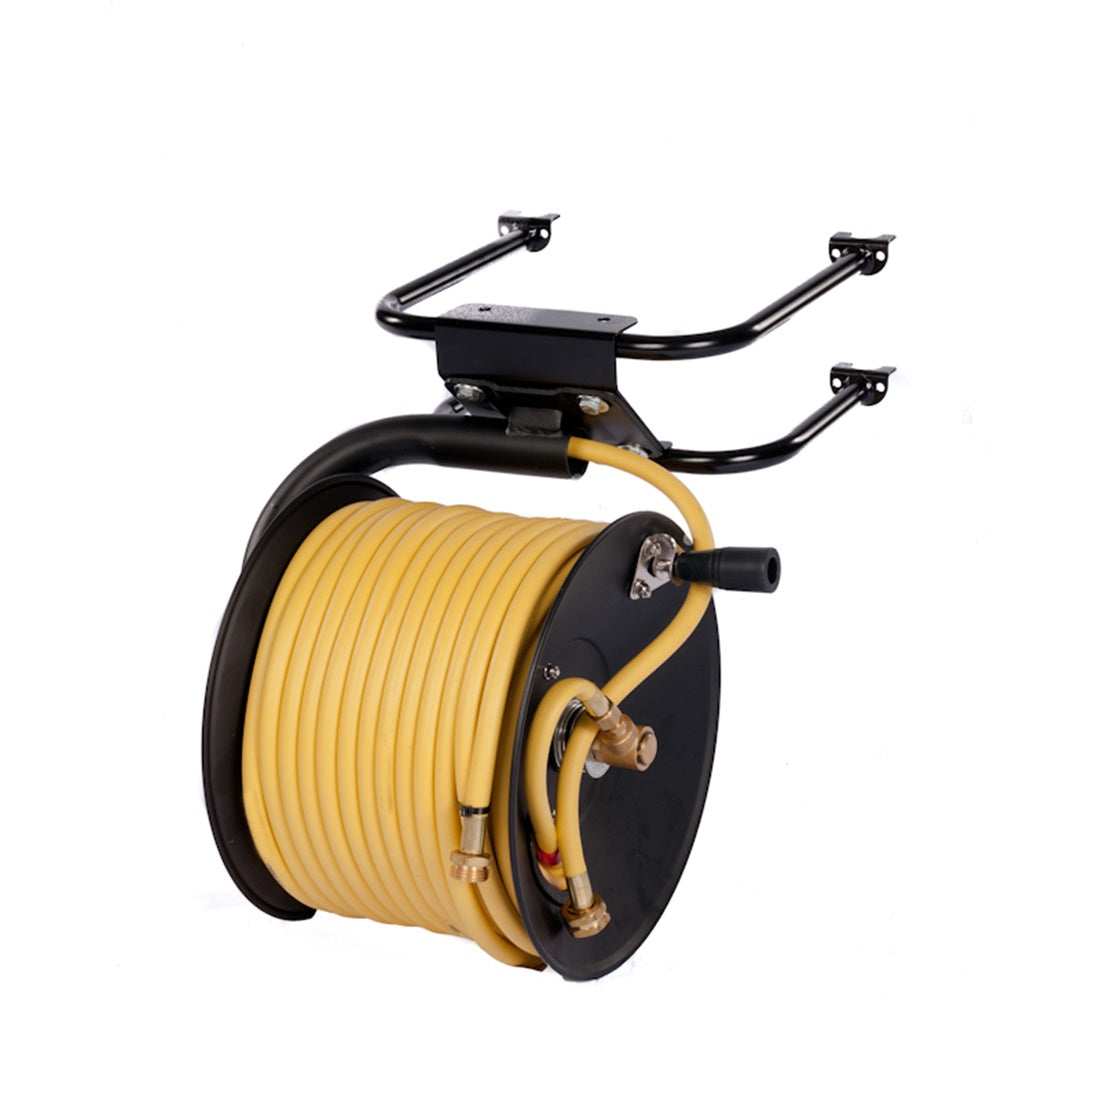 IPC Eagle Low Pressure Hose Reel - Main Product View